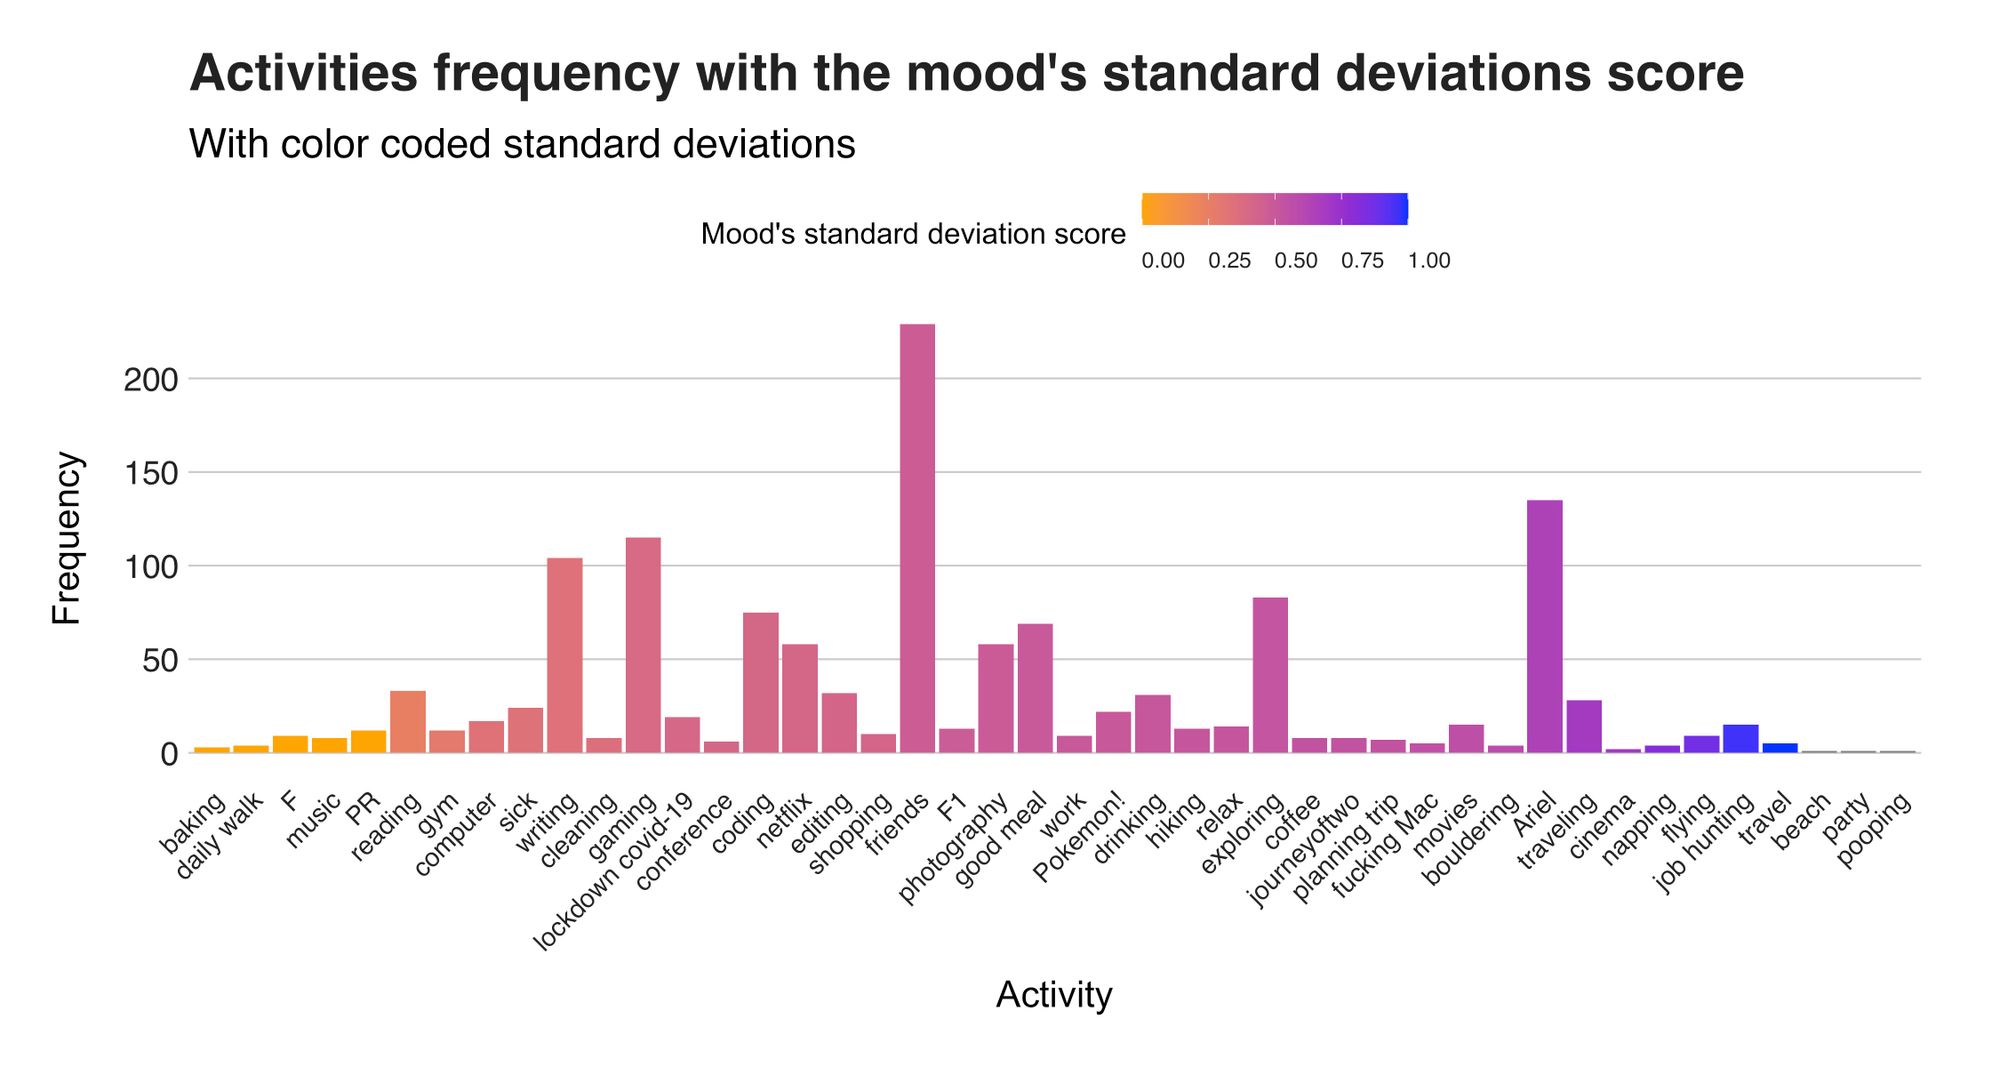 Figure 5. Activities, their frequency, and the mood's standard deviation.